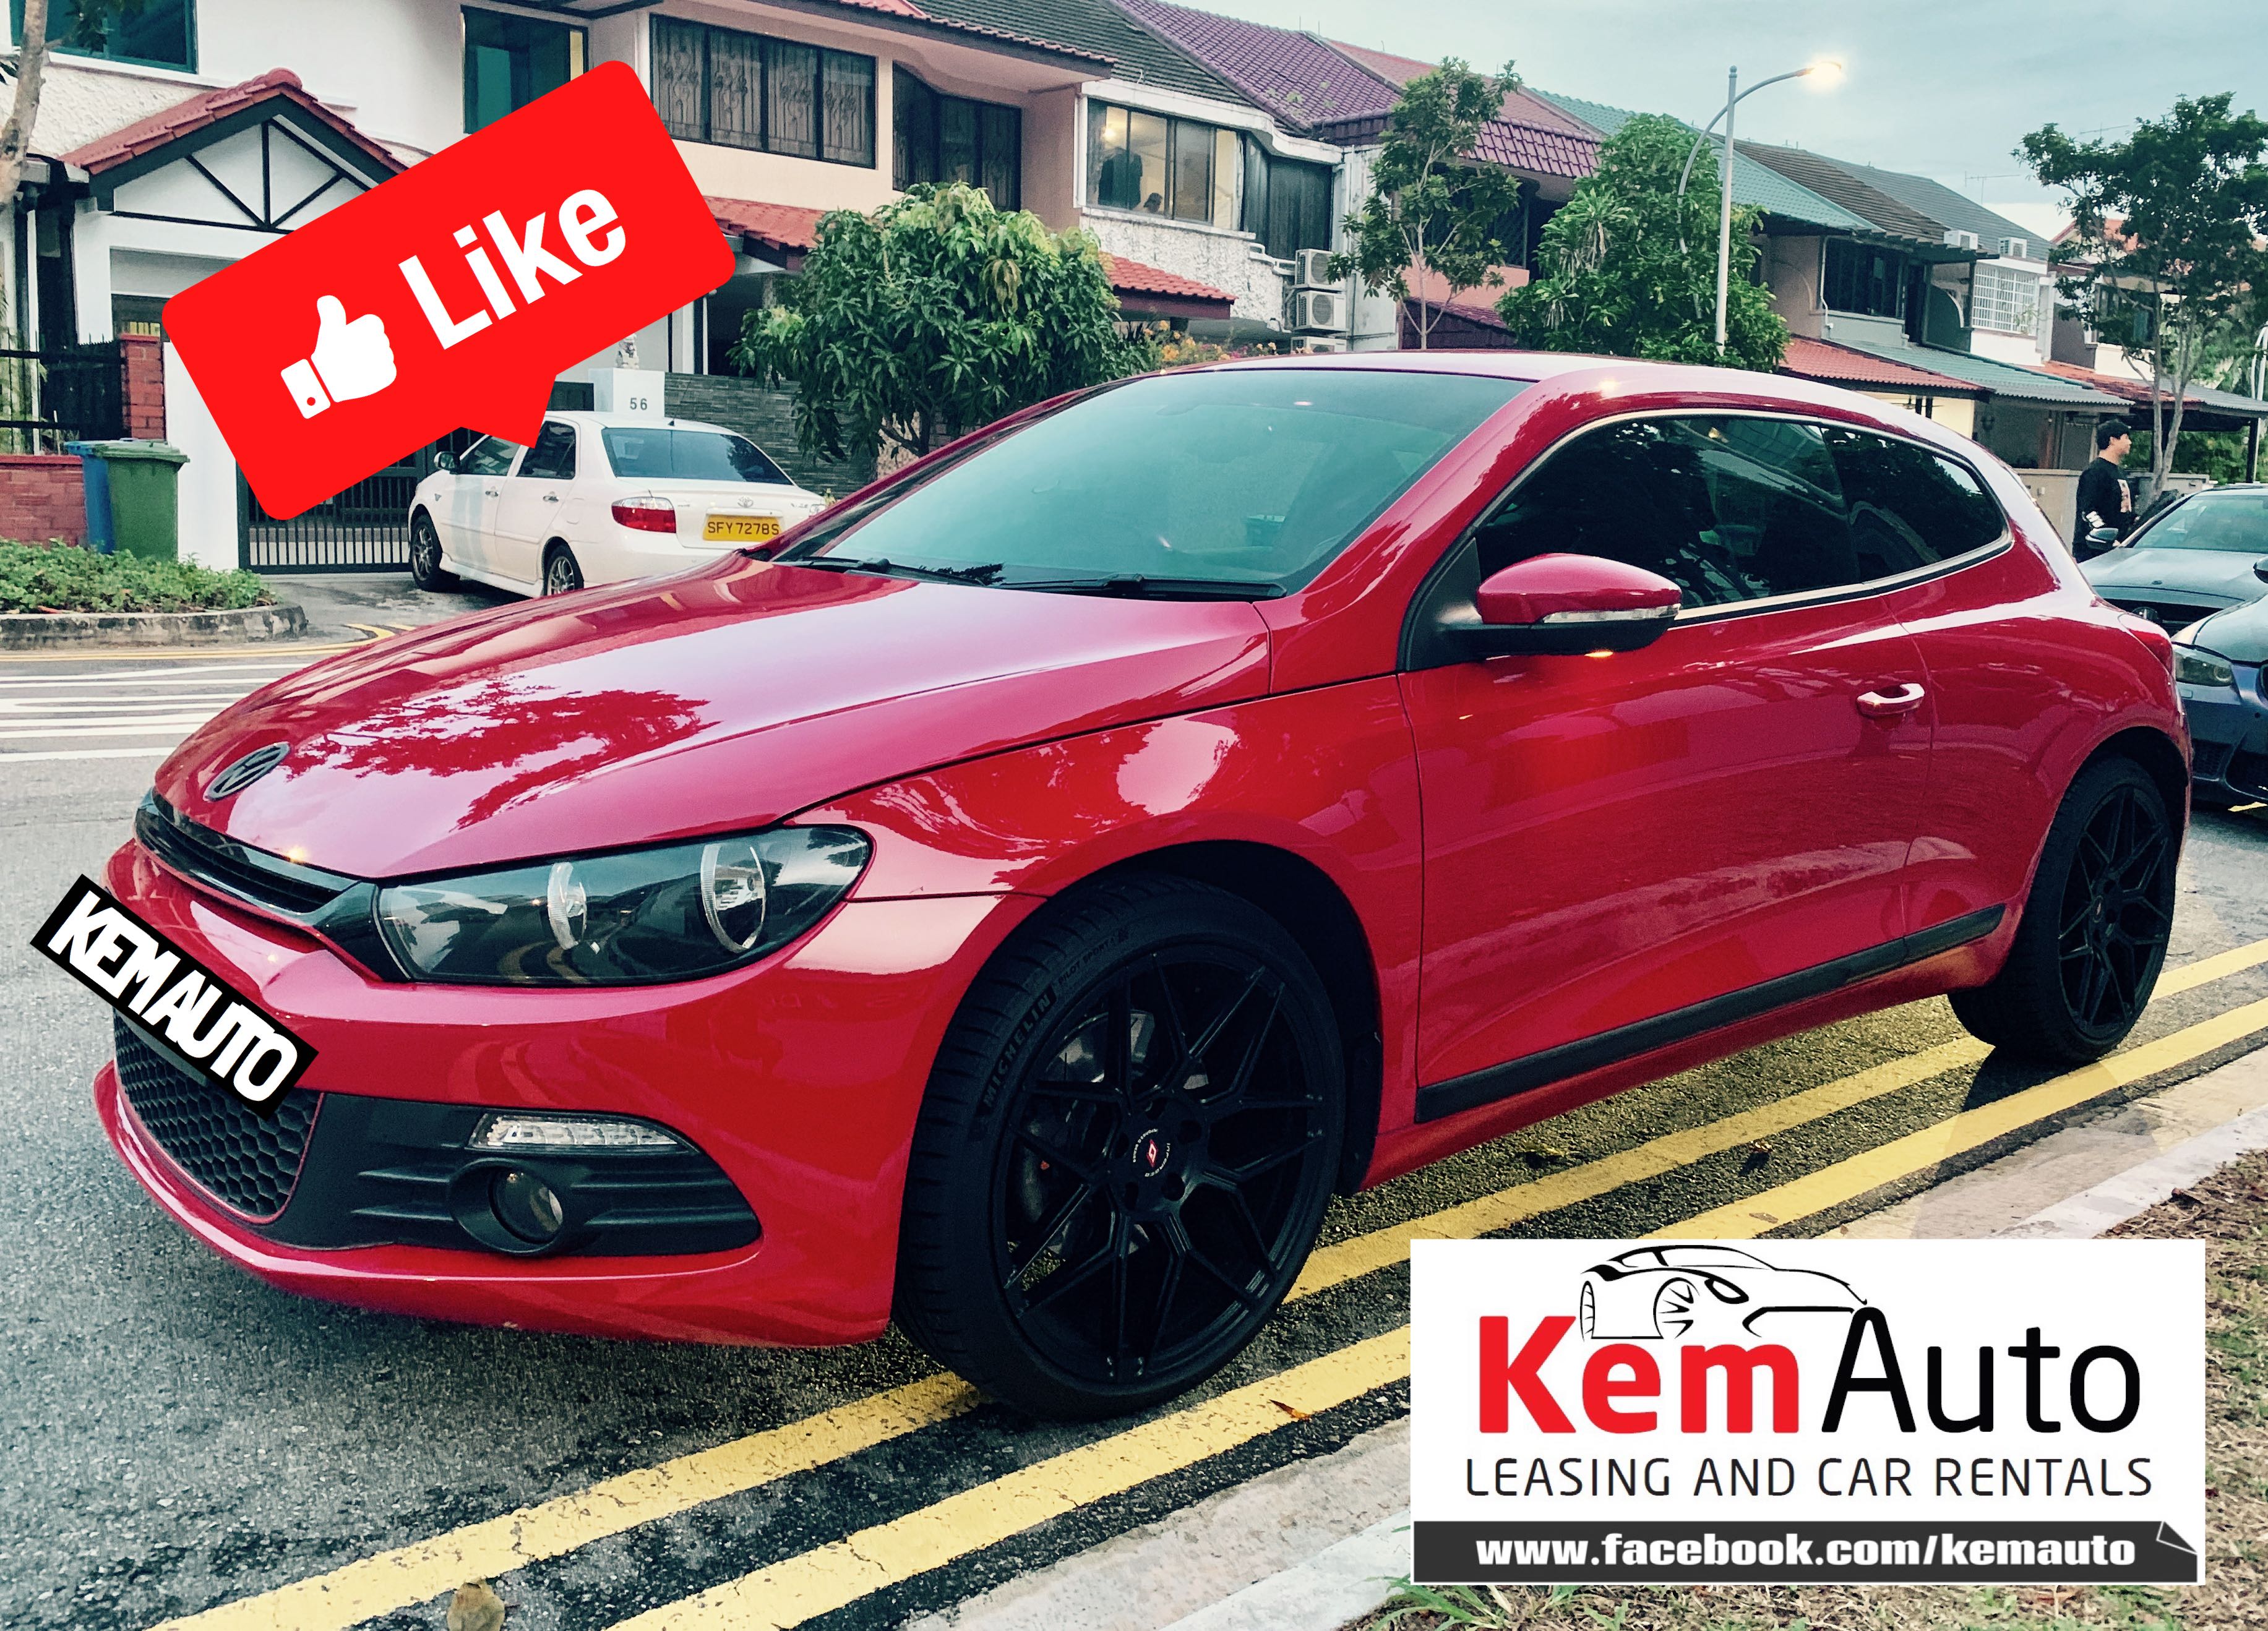 Red Volkswagen Scirocco 1 4 Tsi Dsg Auto Cars Car Rental On Carousell